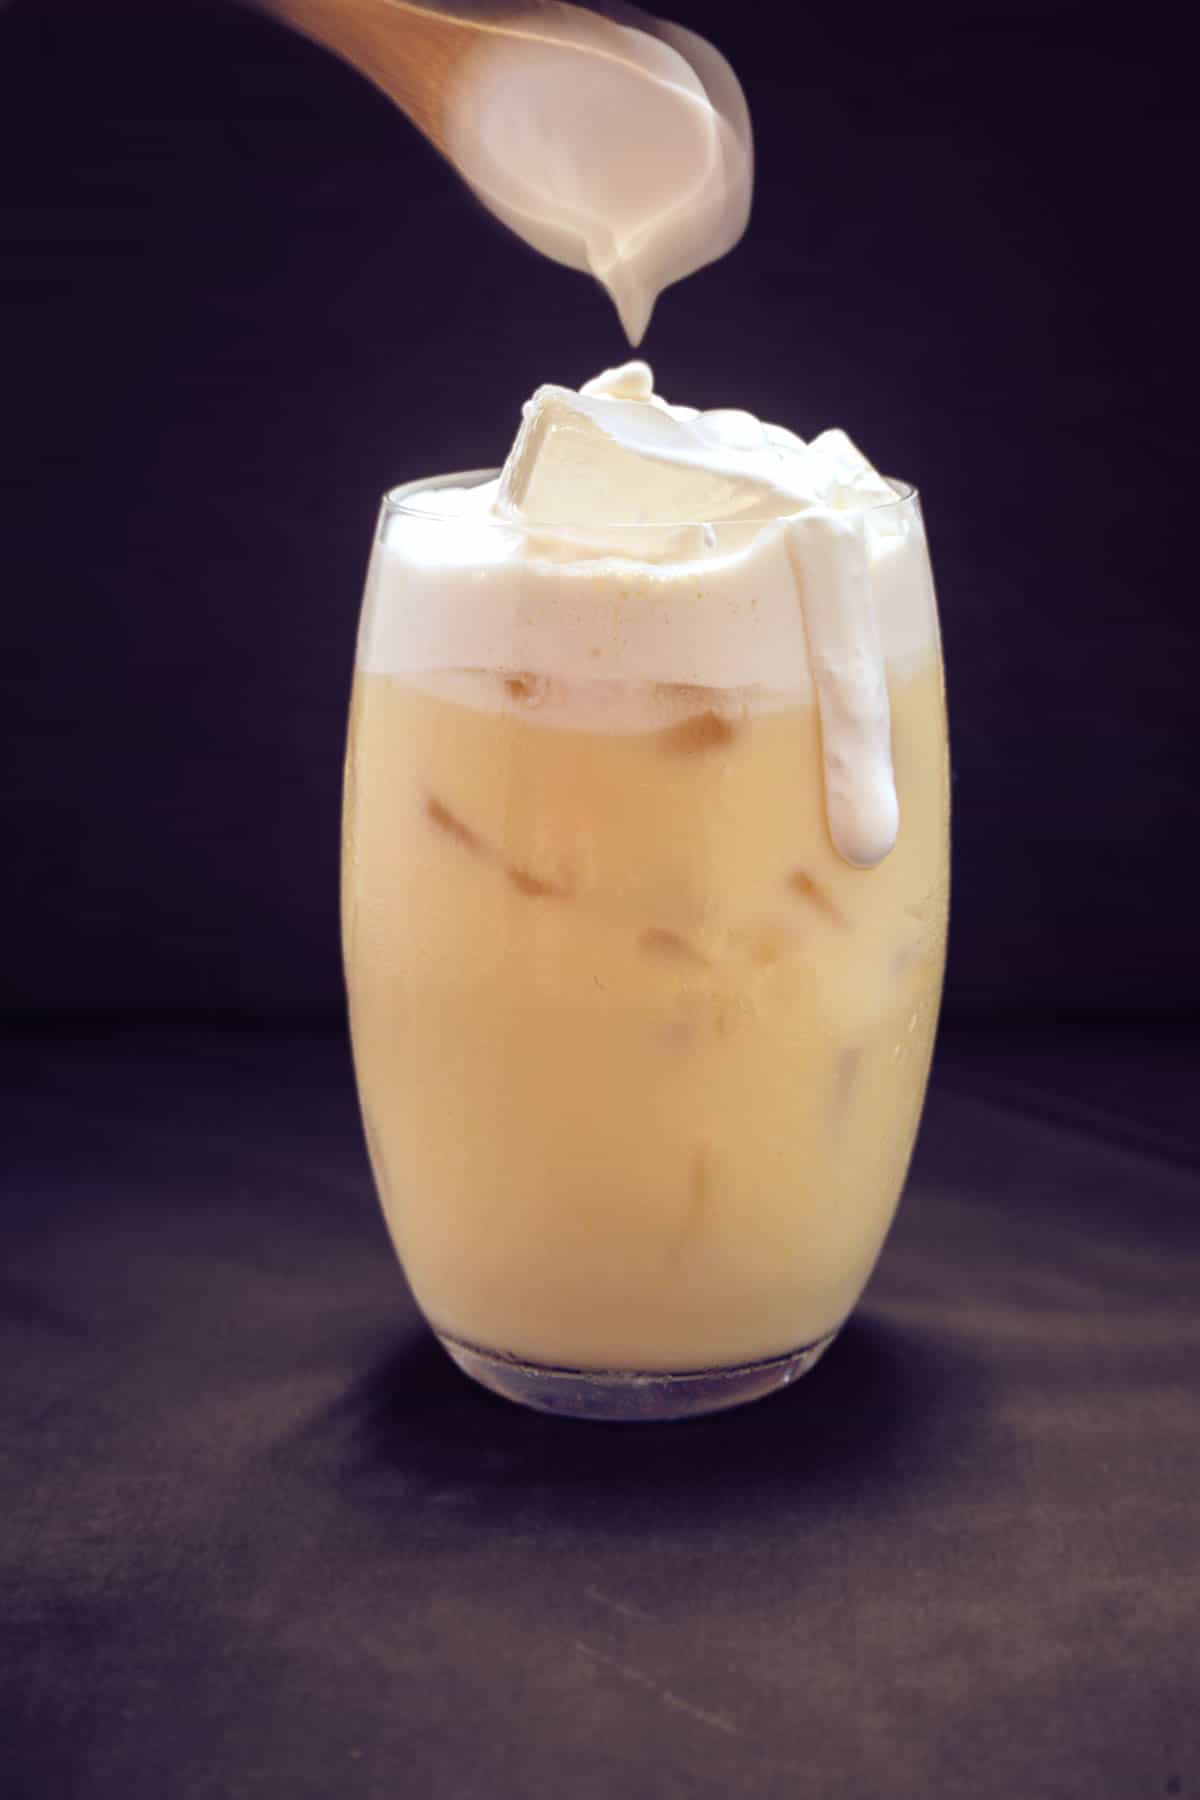 dark background with slightly curved glass filled ⅚ of the way with beige-yellow liquid (corn milk), topped with a creamy cheese foam (white). The foam is messily dripping down the side of the glass.